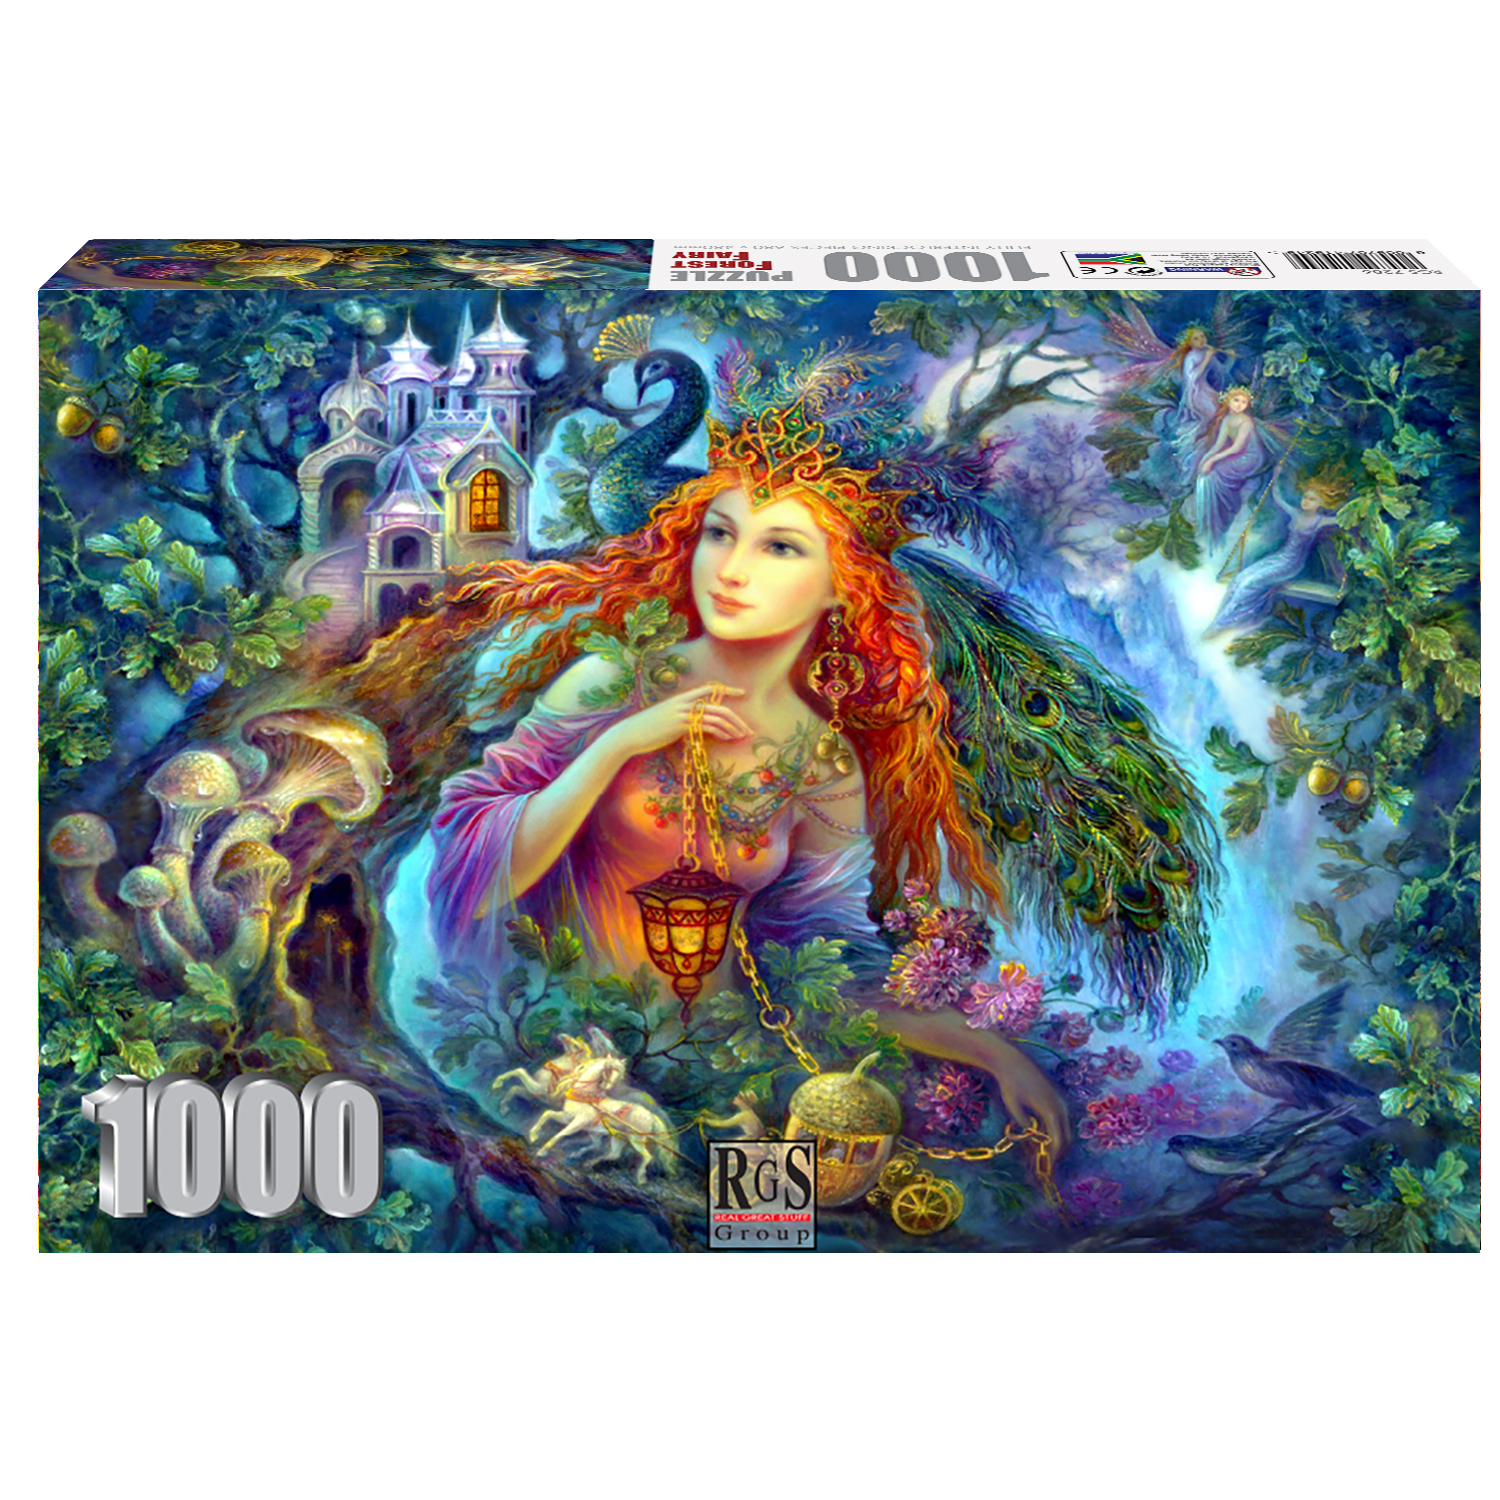 1000pc puzzle of the Forest Fairy and her secret helpers